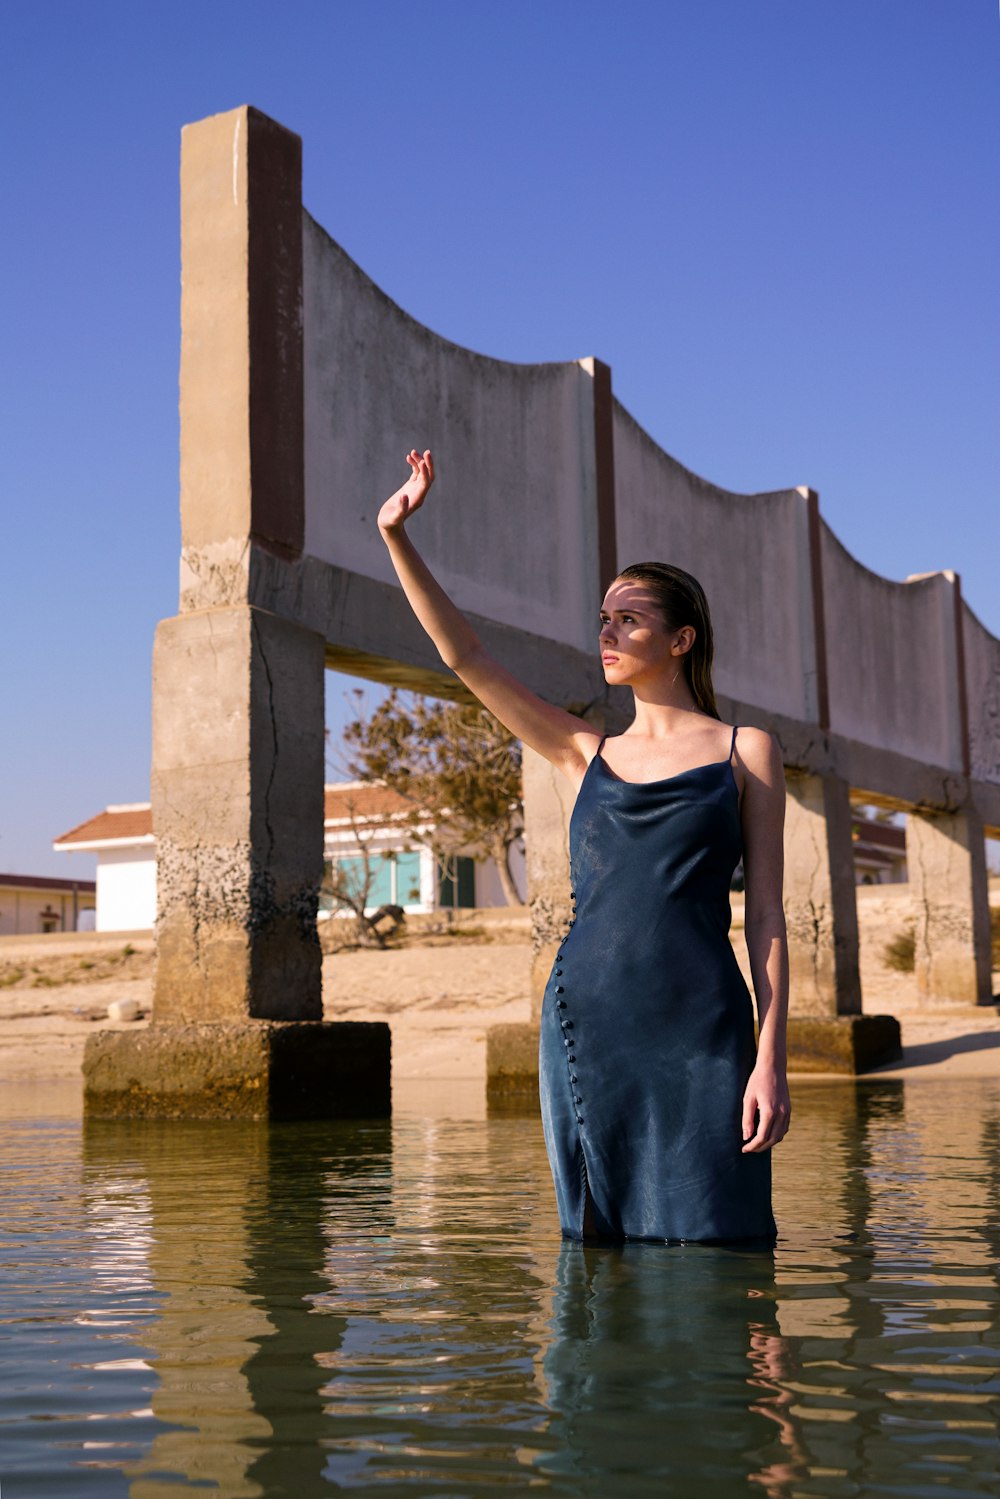 a woman in a blue dress standing in a body of water